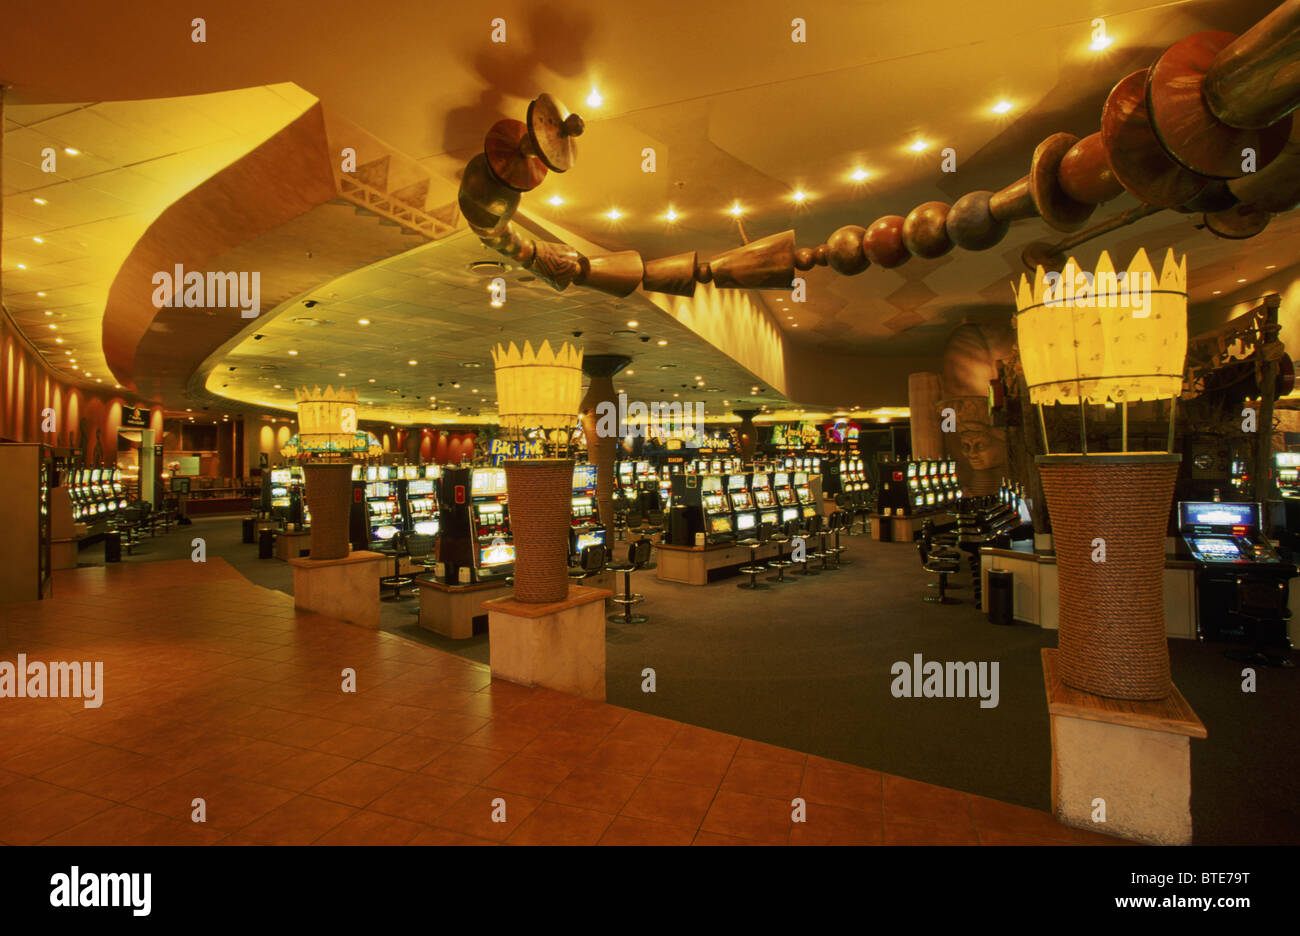 An interior view of the Emerald Casino Stock Photo